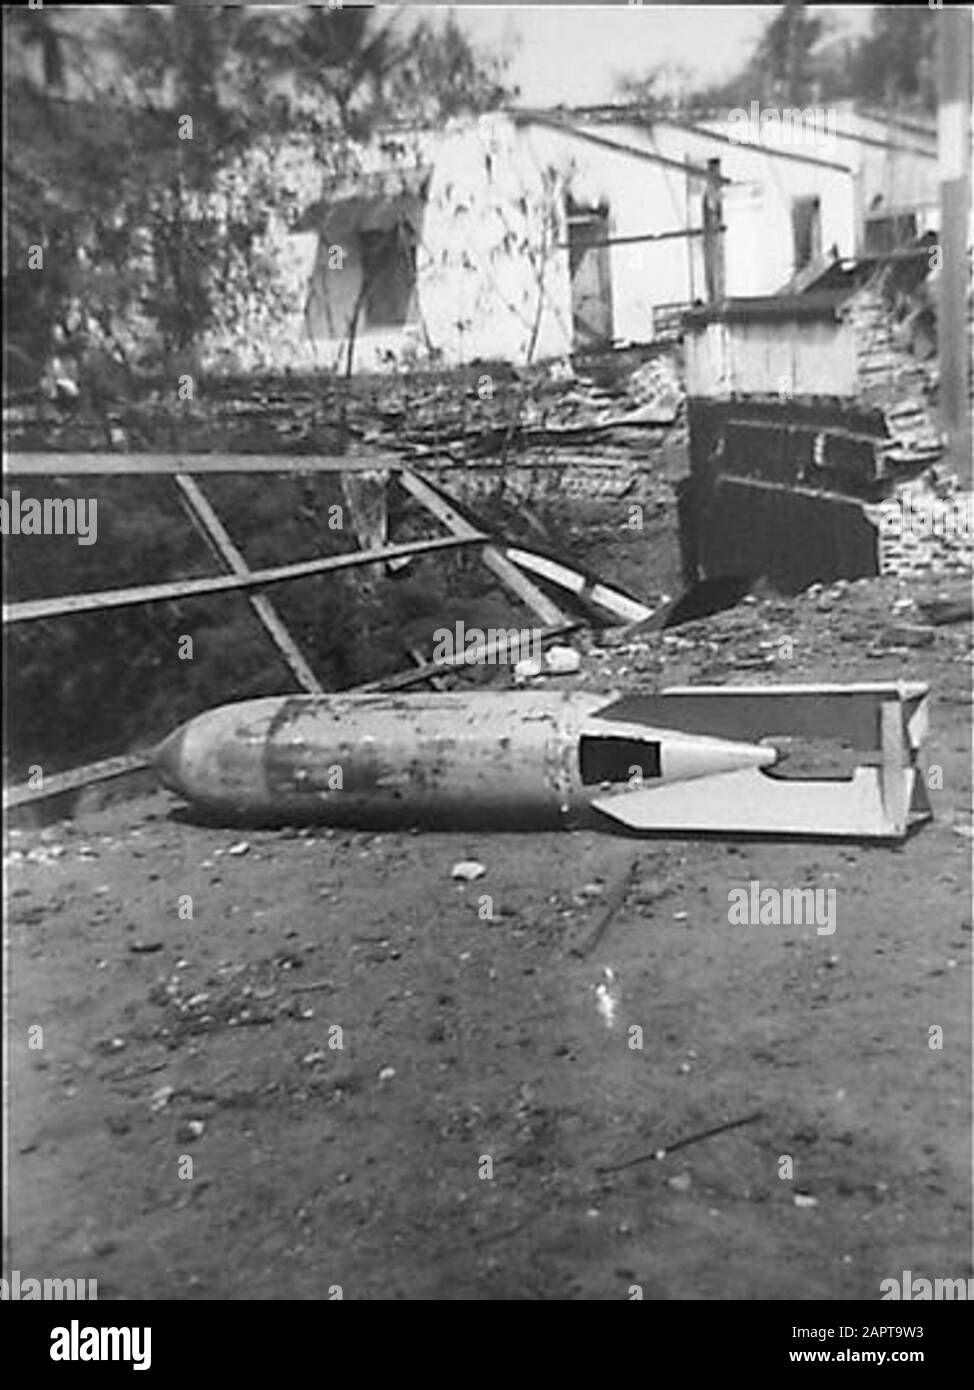 Belongs to art. W.B. Lute. Grässer  No Caption Annotation: Aircraft bomb lies unexploded on a bridge Date: 27 August 1947 Location: Indonesia, Indonesia, Dutch East Indies, Dutch East Indies Keywords: bombs, devastations Stock Photo